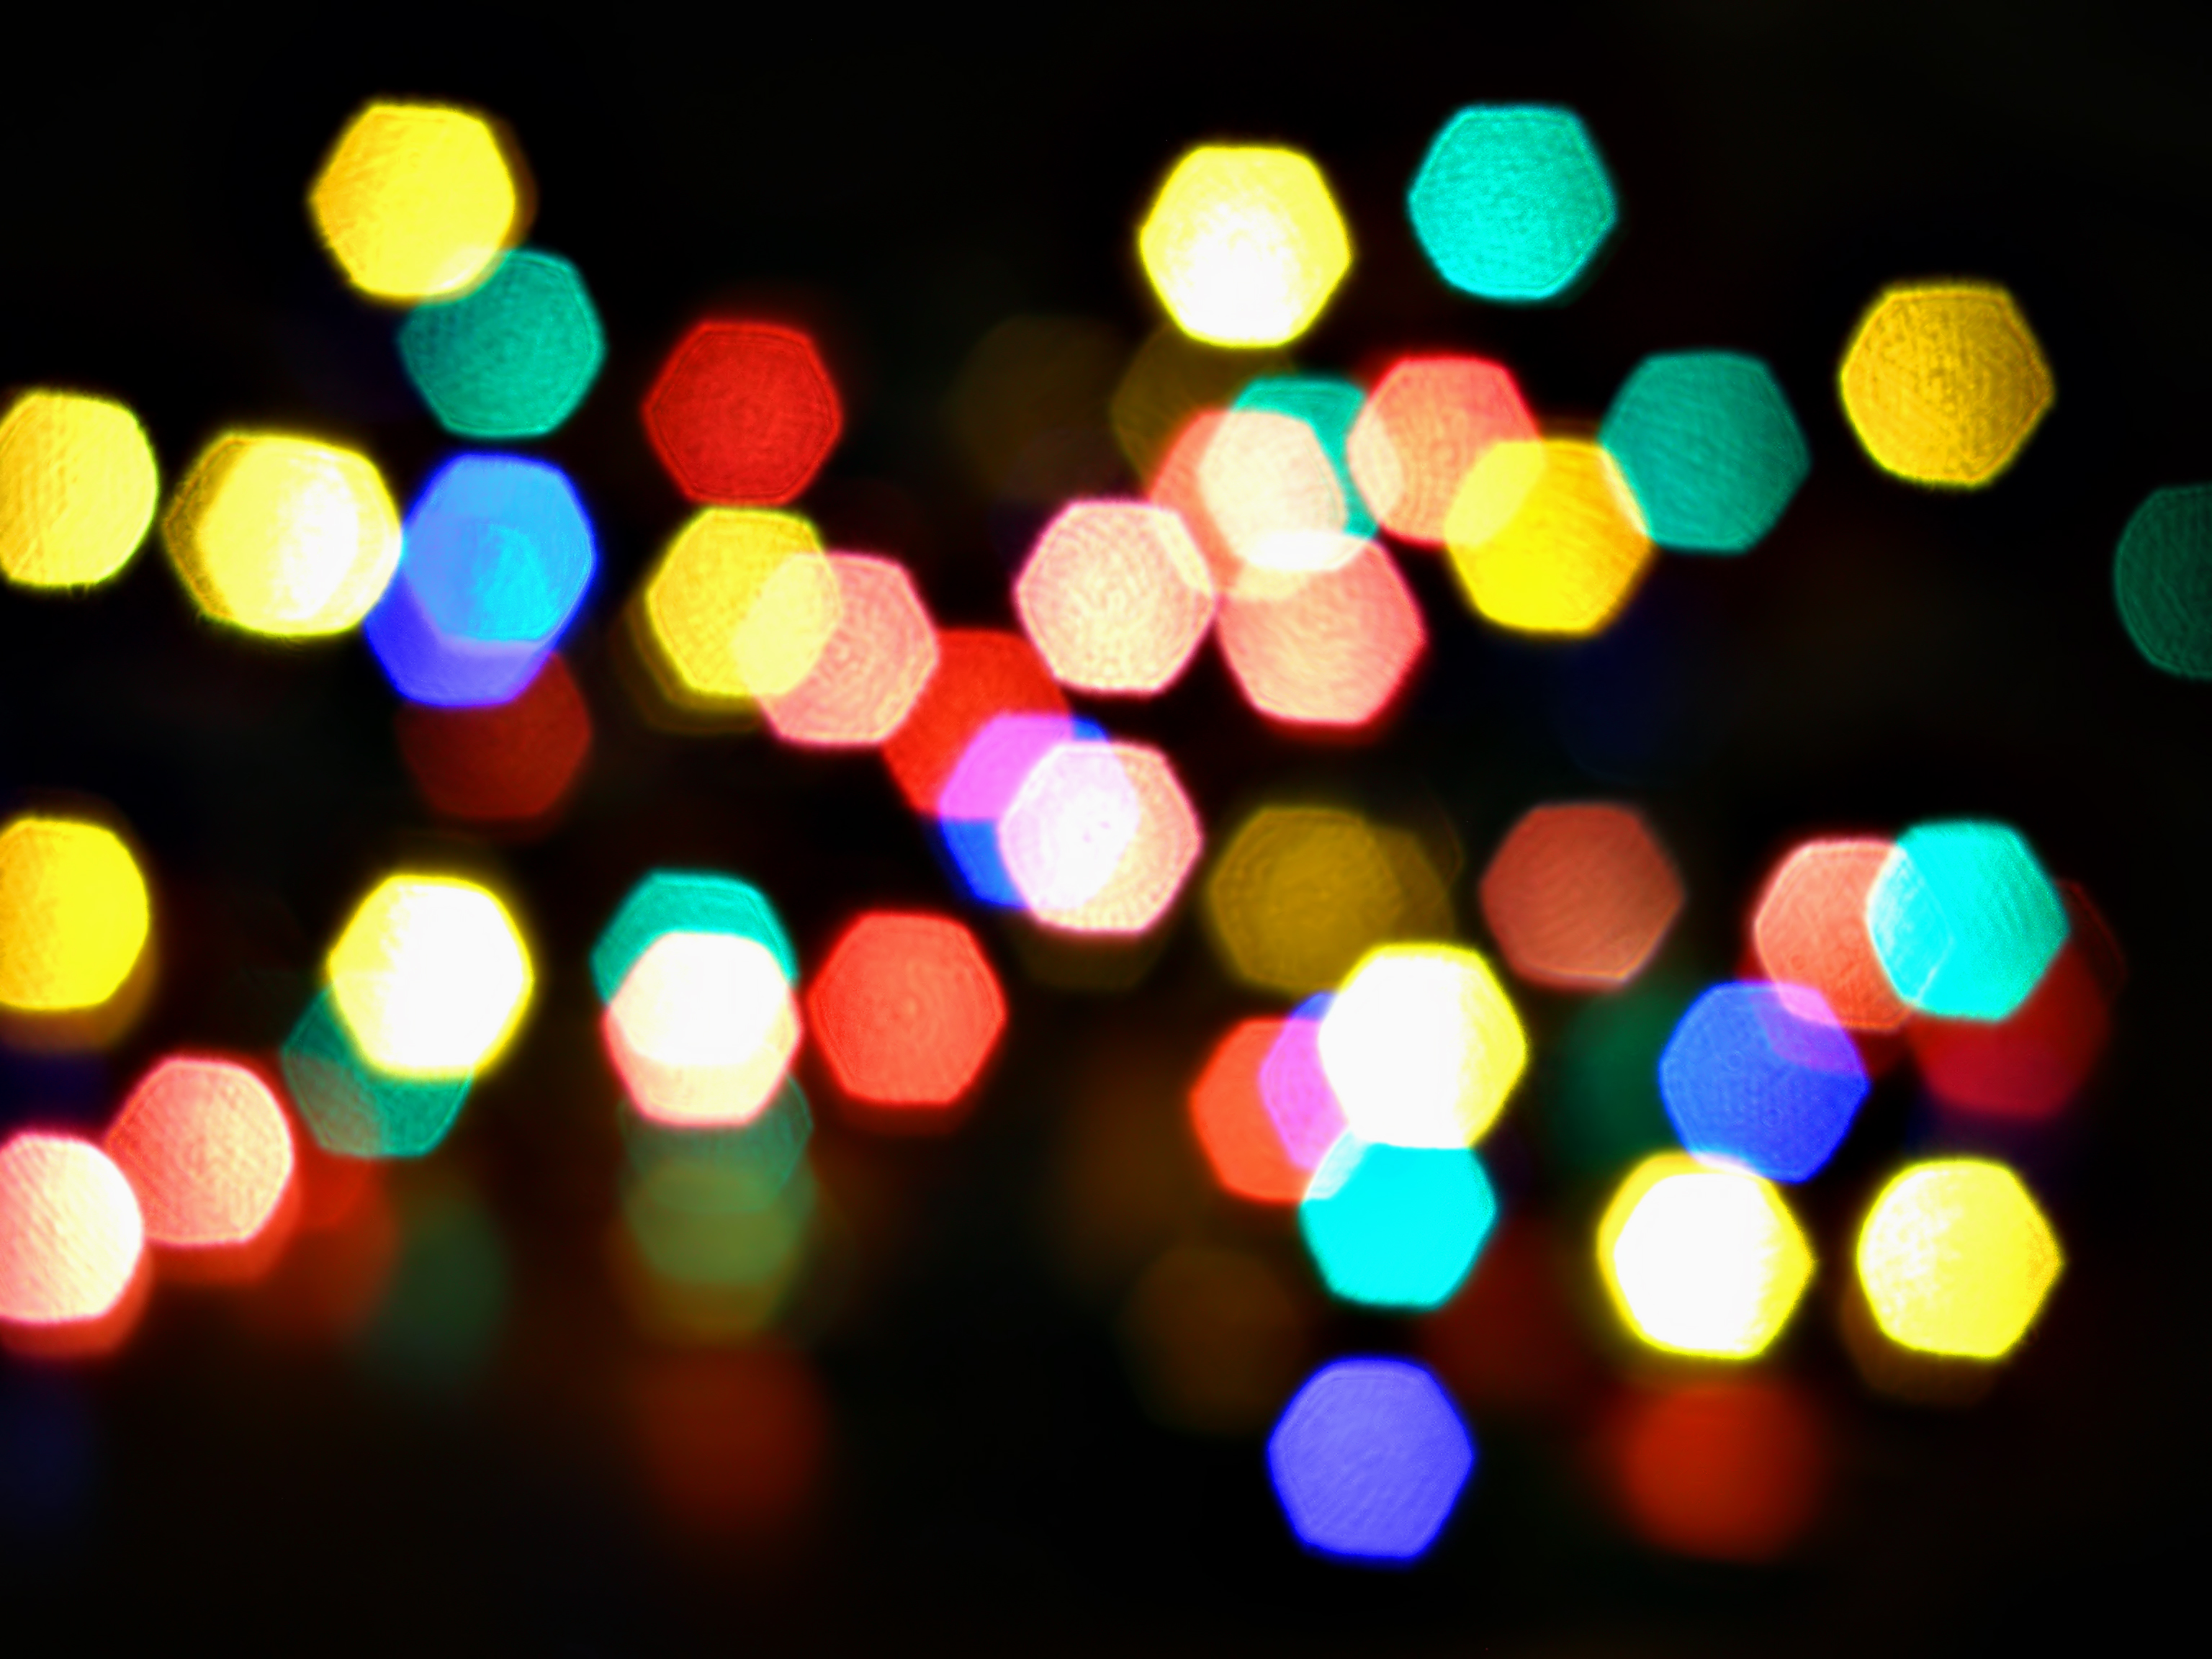 Holiday Lights Background Image Top Pictures Gallery Online